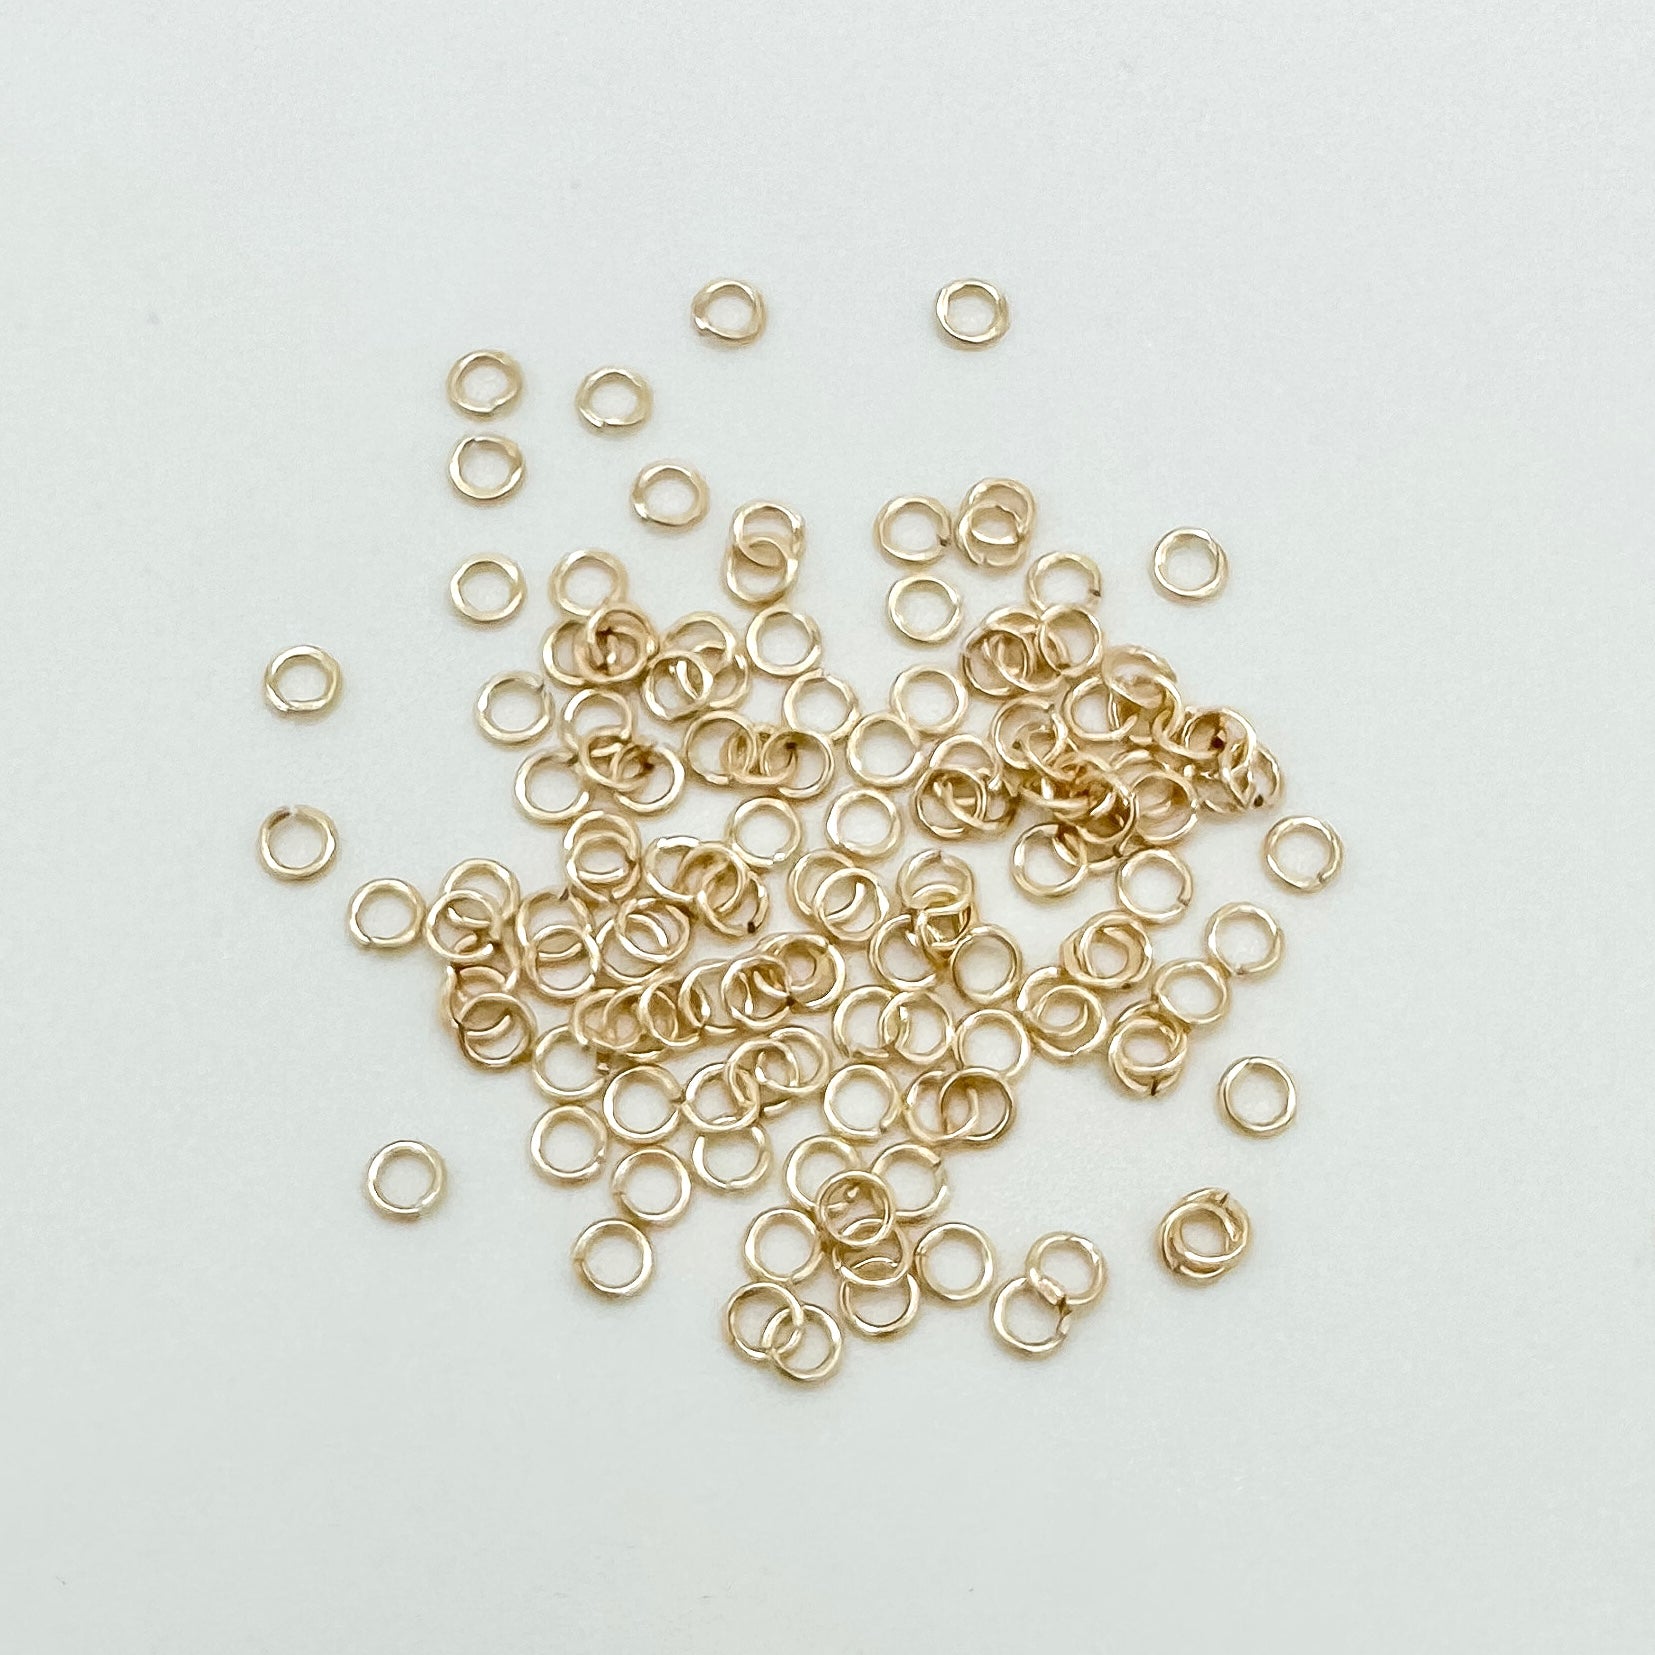 gold filled jump rings / permanent jewelry supplies